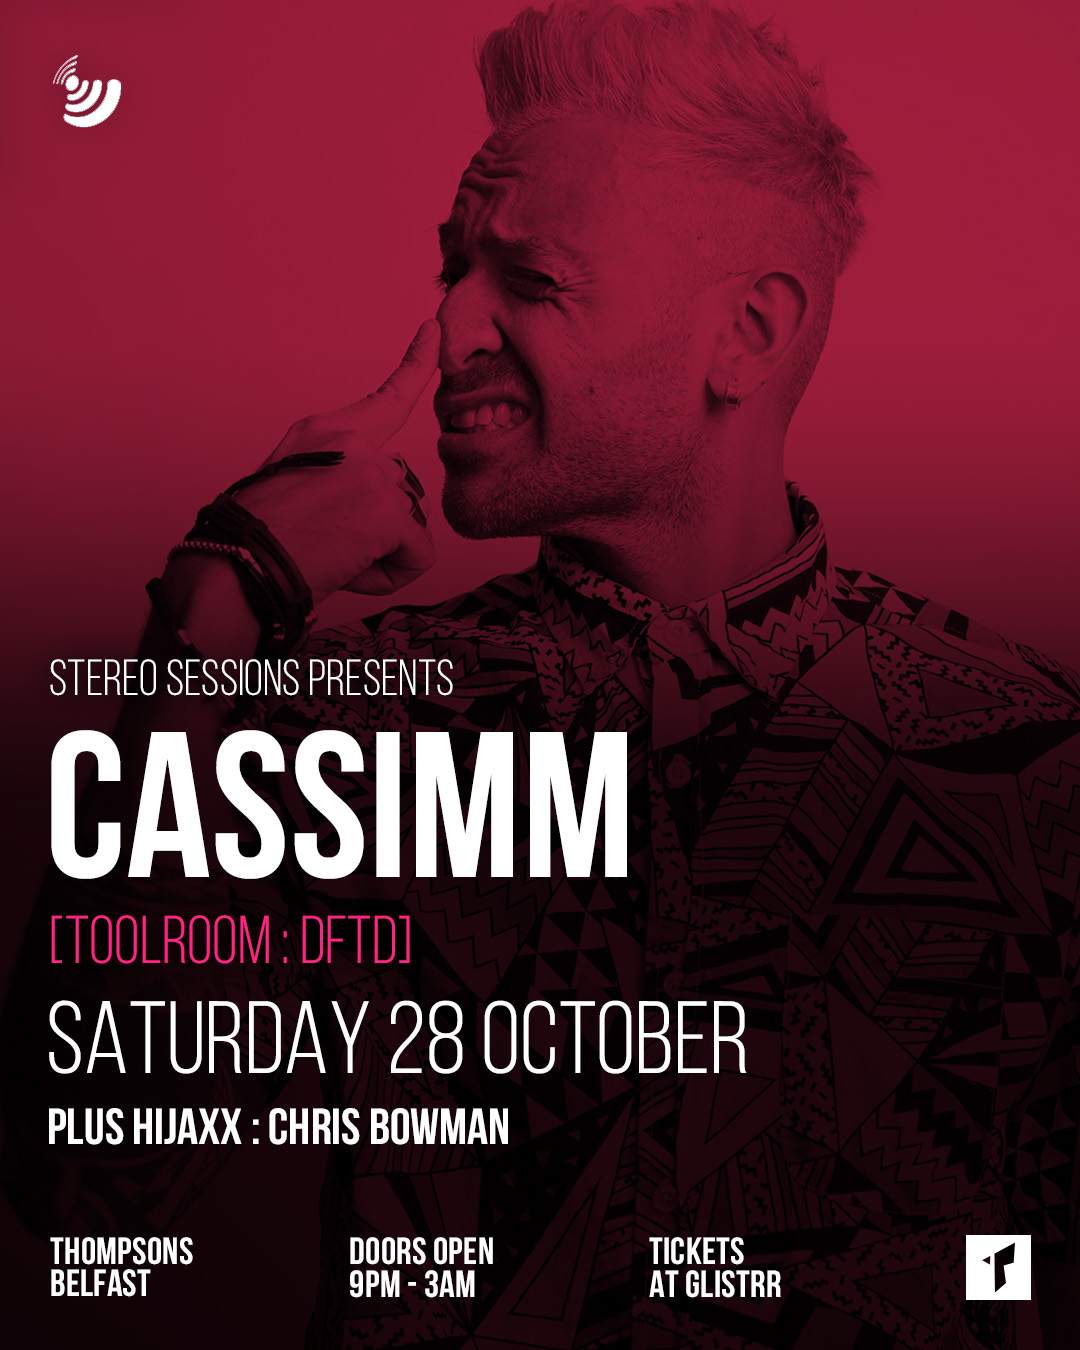 STEREO SESSIONS pres. CASSIMM (Toolroom: Ministry Of Sound) - フライヤー裏